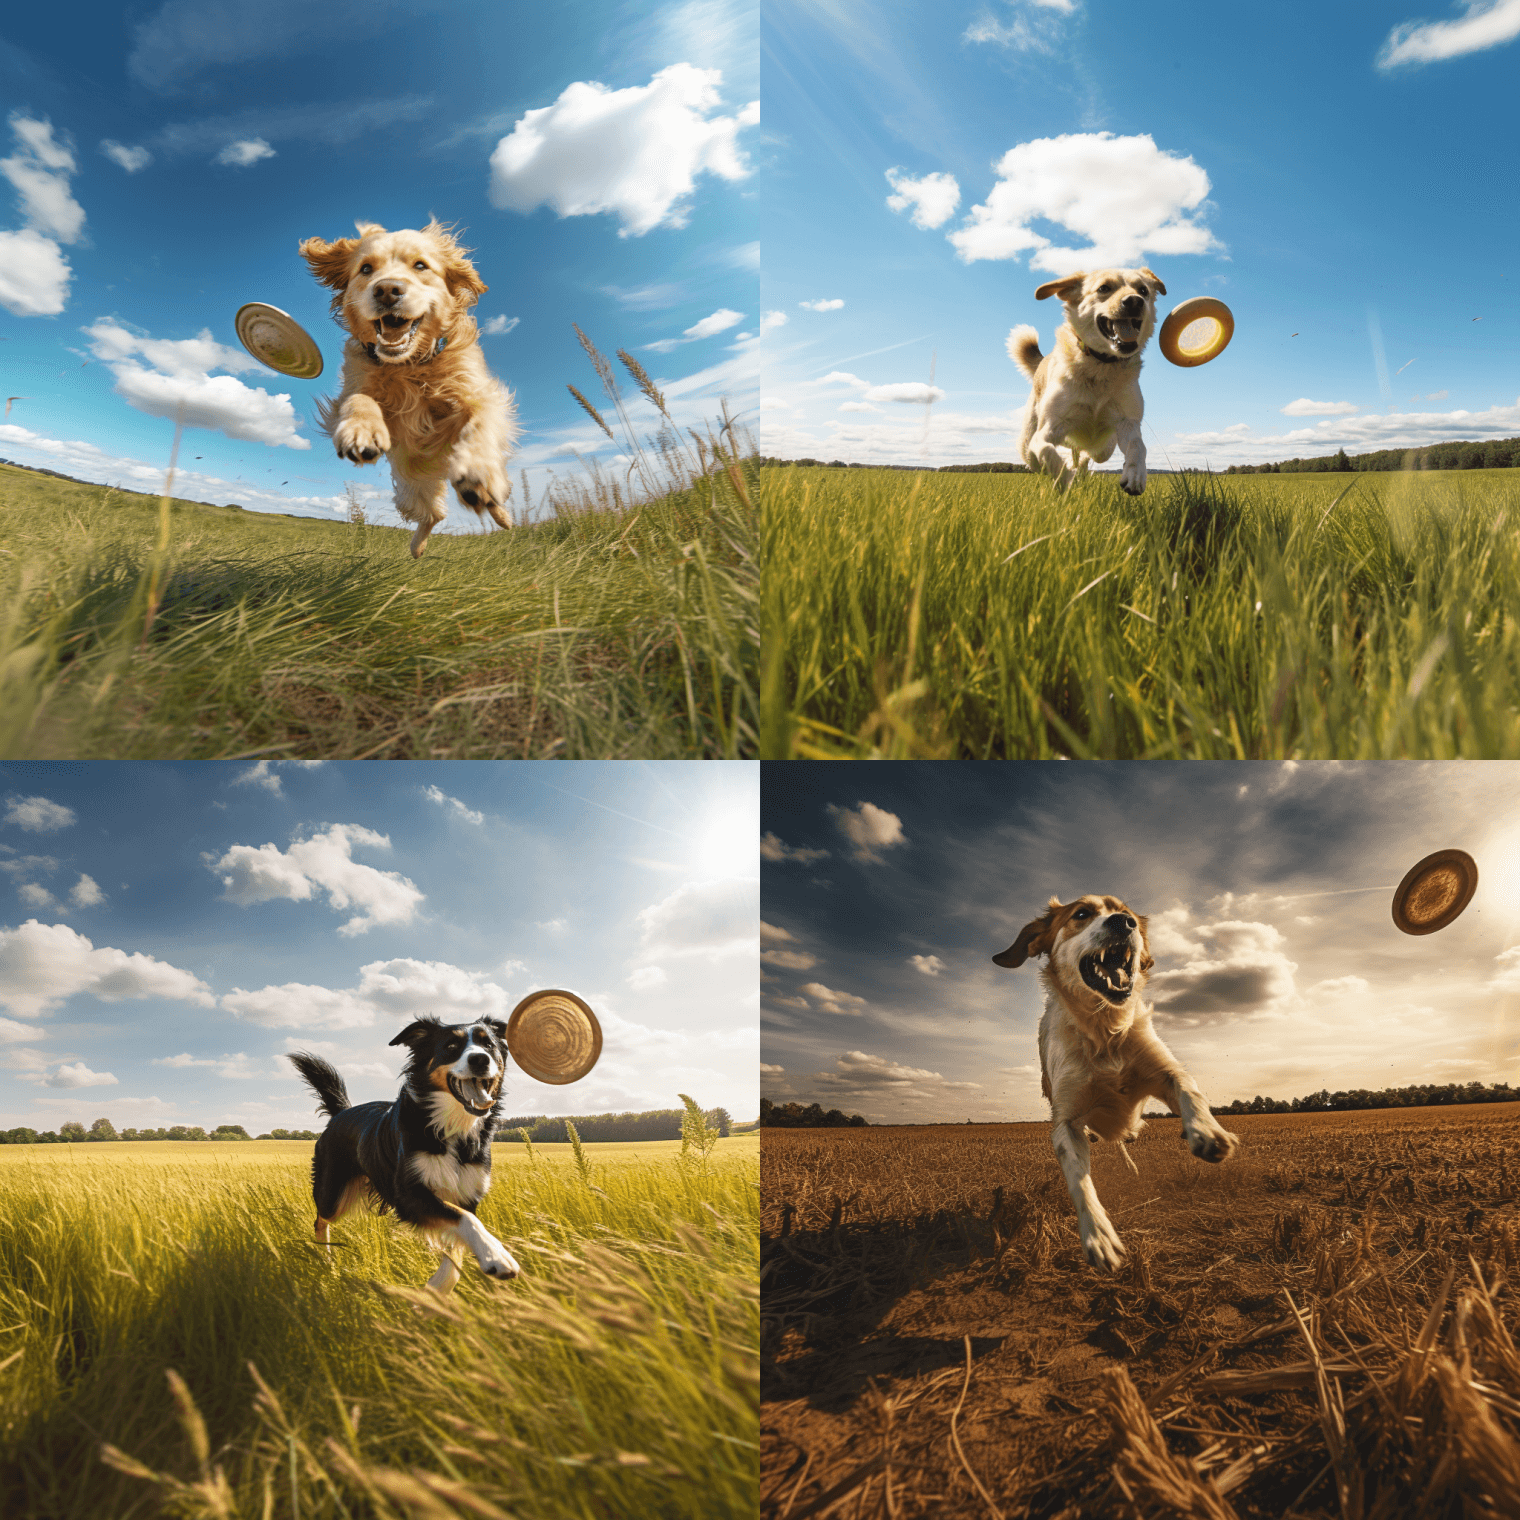 A dog chasing a frisbee while running in a field